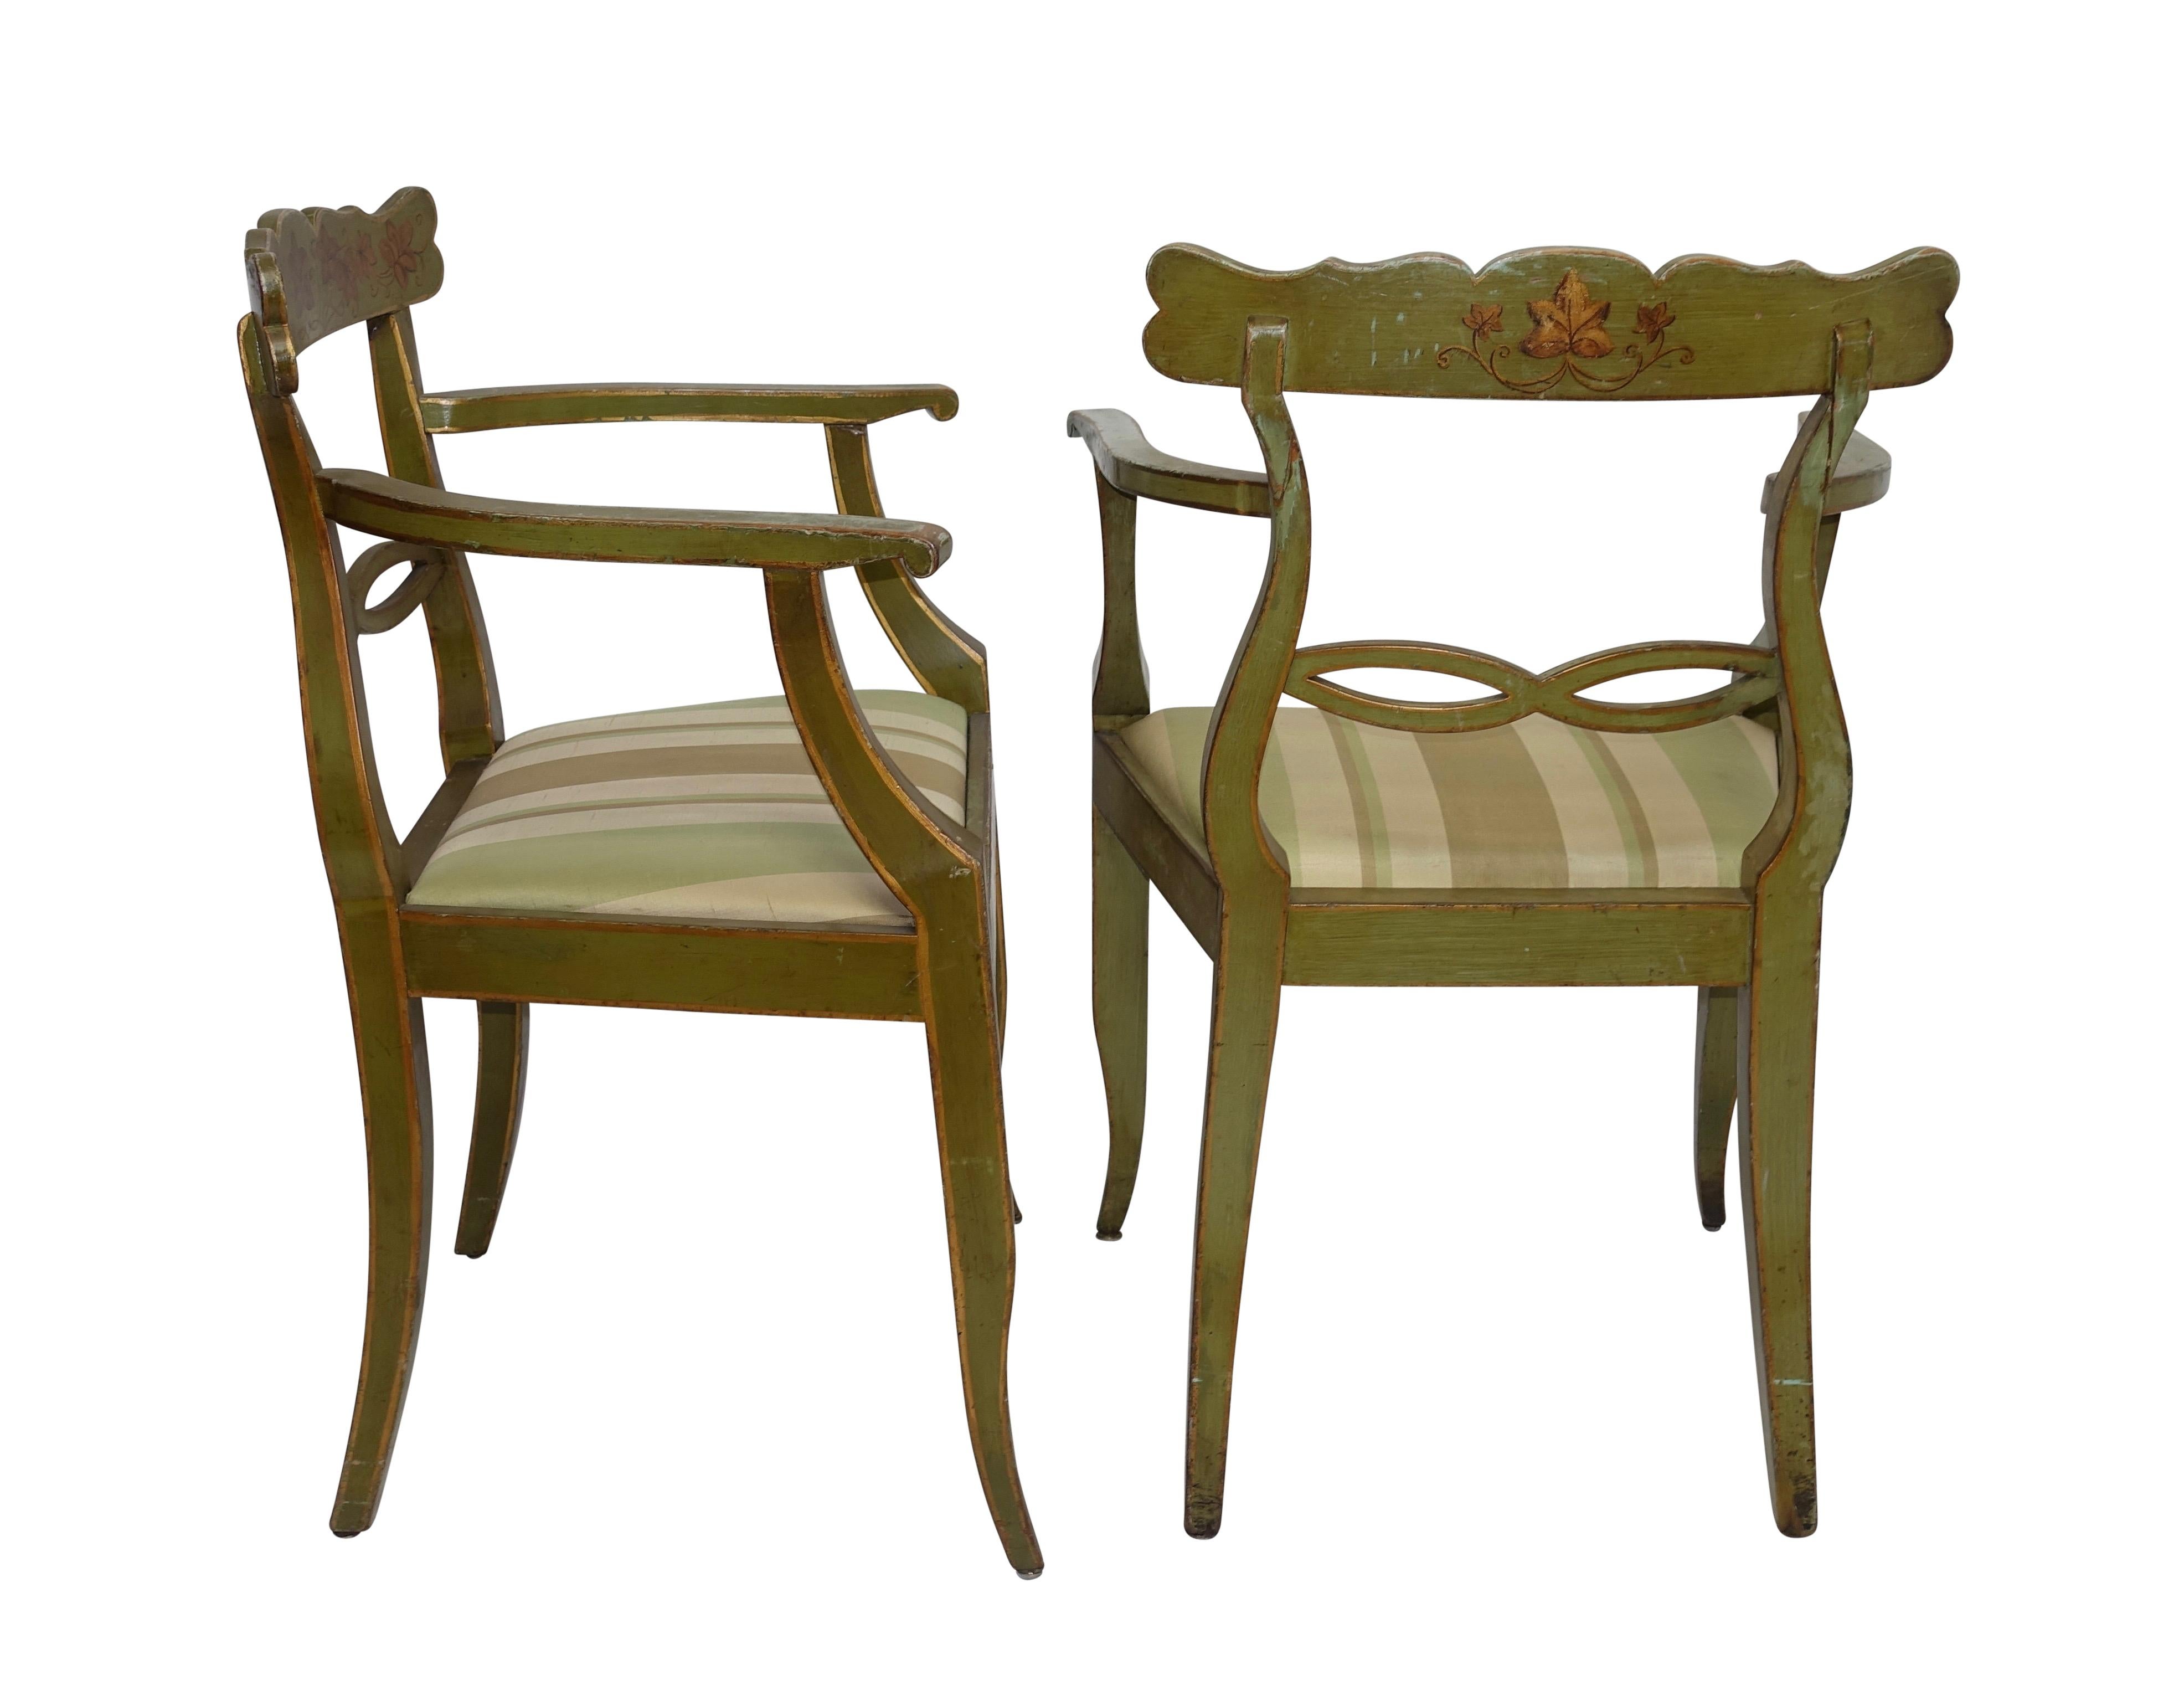 Four Green Painted Armchairs with Trailing Ivy, Northern European, 19th Century In Good Condition For Sale In San Francisco, CA